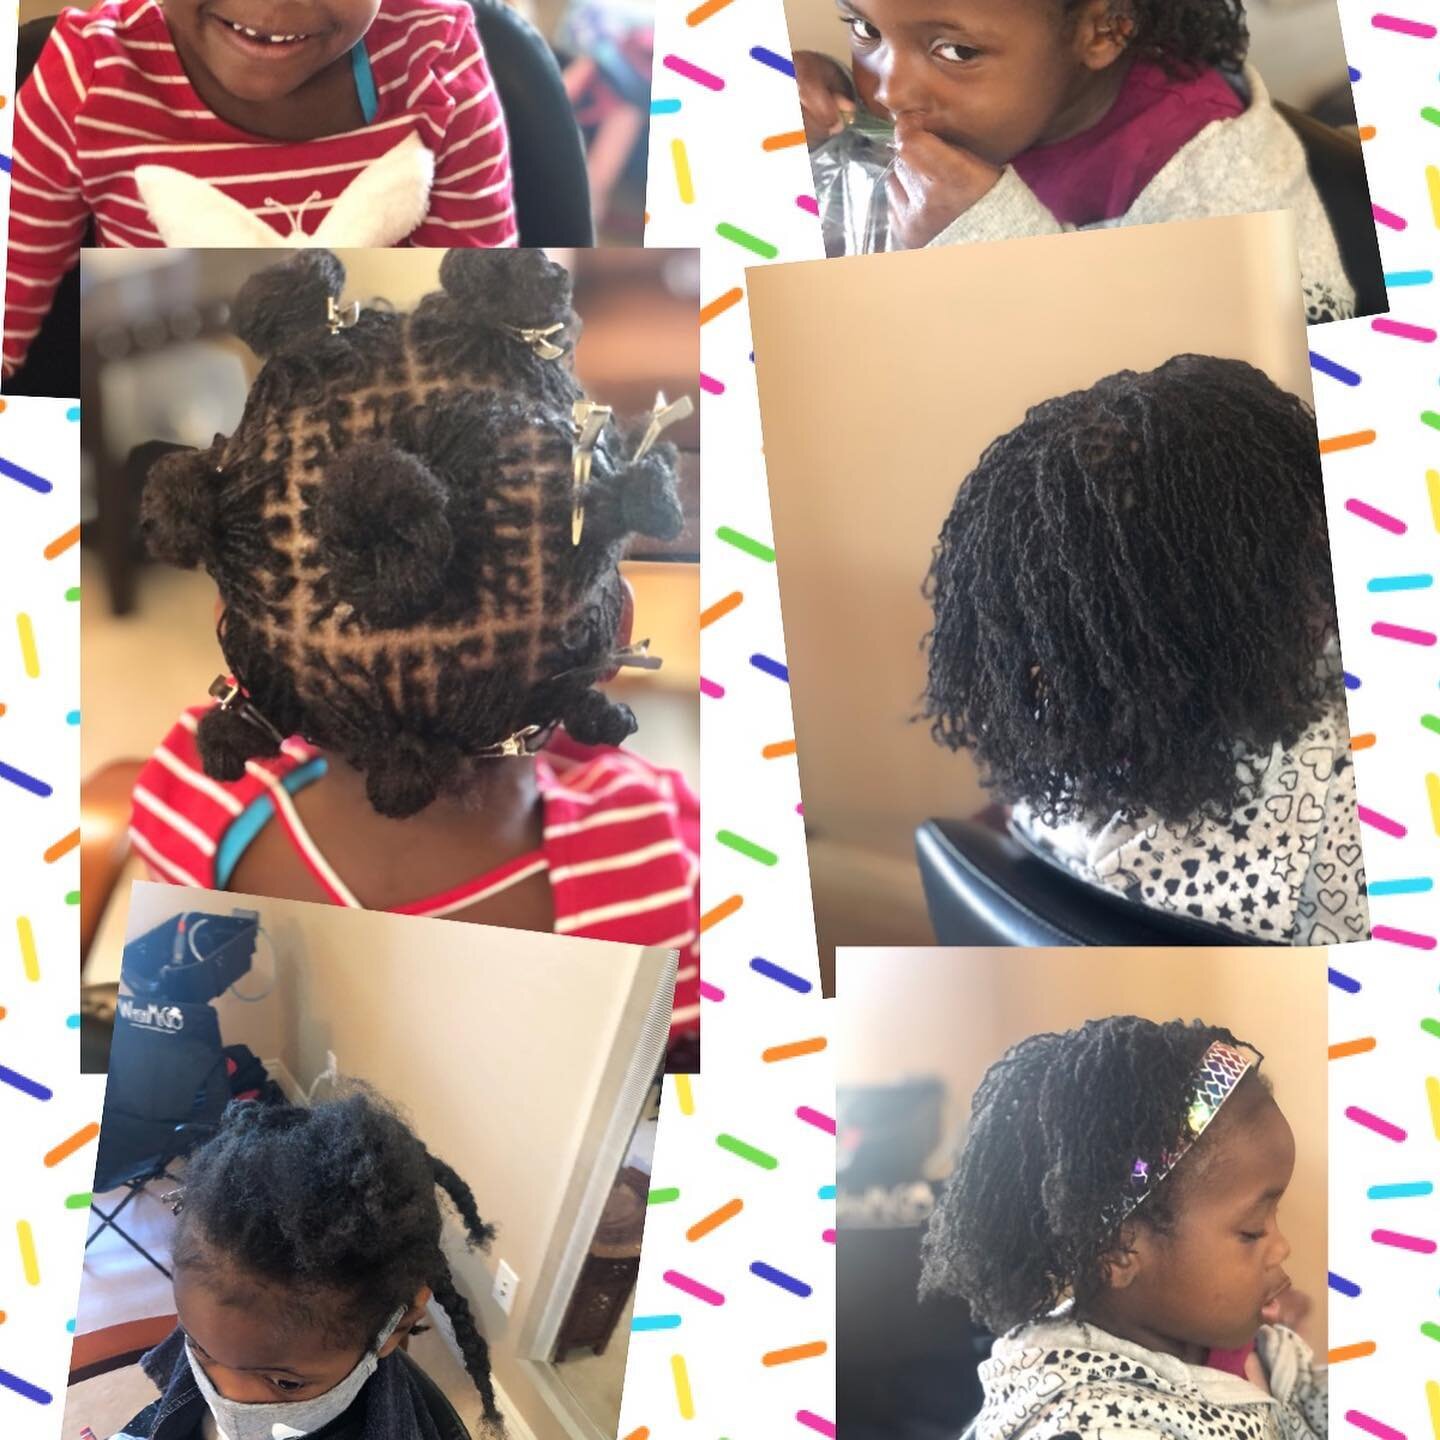 My youngest sisterlock client. 4 years old! We installed over 4 half day sessions. Pictures on the right is almost 2 months later. #sisterlockskids #sisterlocsphoenix #sisterlocksarizona #sisterlocksaz #phoenixsisterlocks #sisterlocksinstall #kidswit